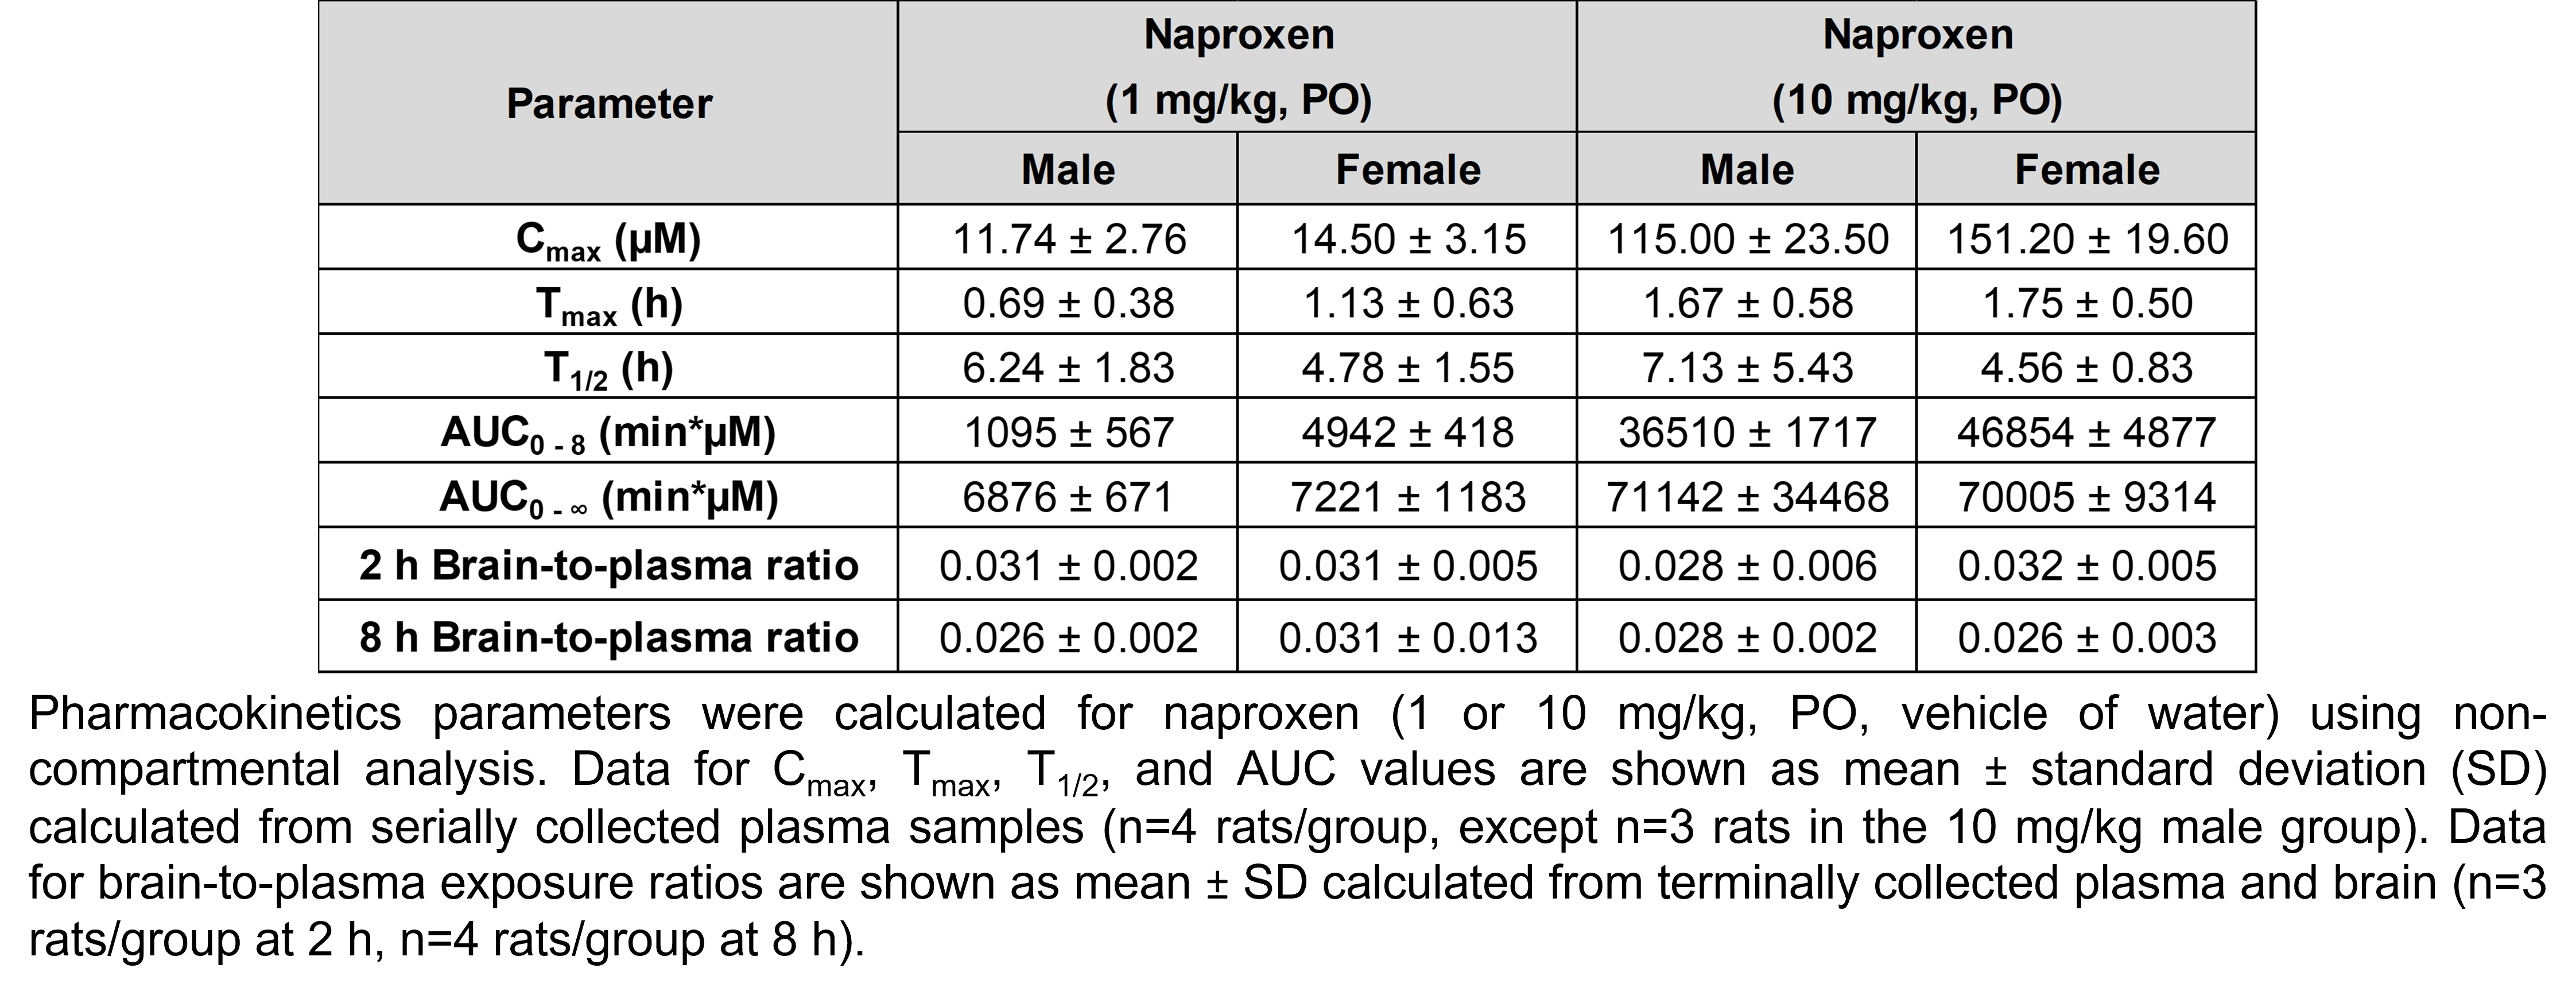 A table shows pharmacokinetics parameters calculated for naproxen using non-compartmental analysis in male and female rats treated with naproxen (1 or 10 mg/kg, PO, vehicle of water). The means for the 4 groups (males and females treated with 1 mg/kg naproxen and males and females treated with 10 mg/kg naproxen, respectively) are as follows. The highest concentration (Cmax) was 11.74, 14.5, 115, and 151.2 µM; the time at the maximum concentration (Tmax) was 0.69, 1.13, 1.67, and 1.75 hours; the half-life (T1/2) was 6.24, 4.78, 7.13, and 4.56 hours; area under the curve for time 0 to 8 hours was 1095, 4942, 36510, and 46854 minutes*µM; area under the curve for time 0 to infinity was 6876, 7221, 71142, and 70005 minutes*µM; the brain-to-plasma ratio at 2 hours was 0.031, 0.031, 0.028, and 0.032; the brain-to-plasma ratio at 8 hours was 0.026, 0.031, 0.028, and 0.026.